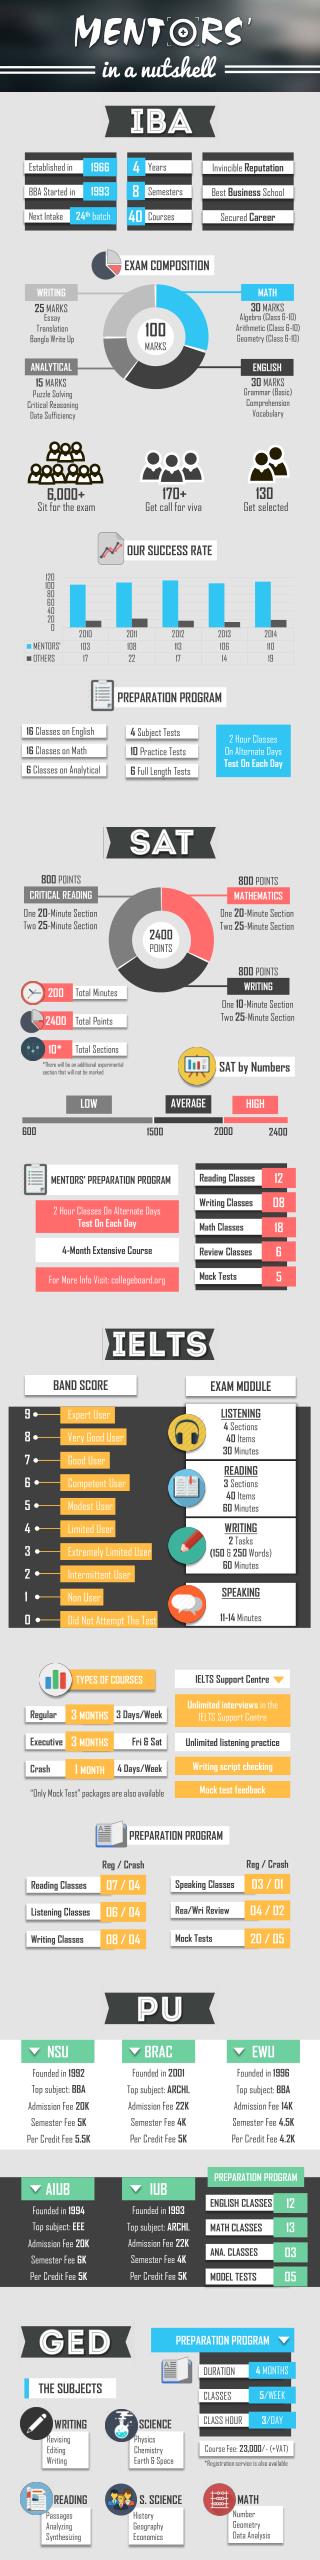 Mentors' in a Nutshell (Info-Graphics)